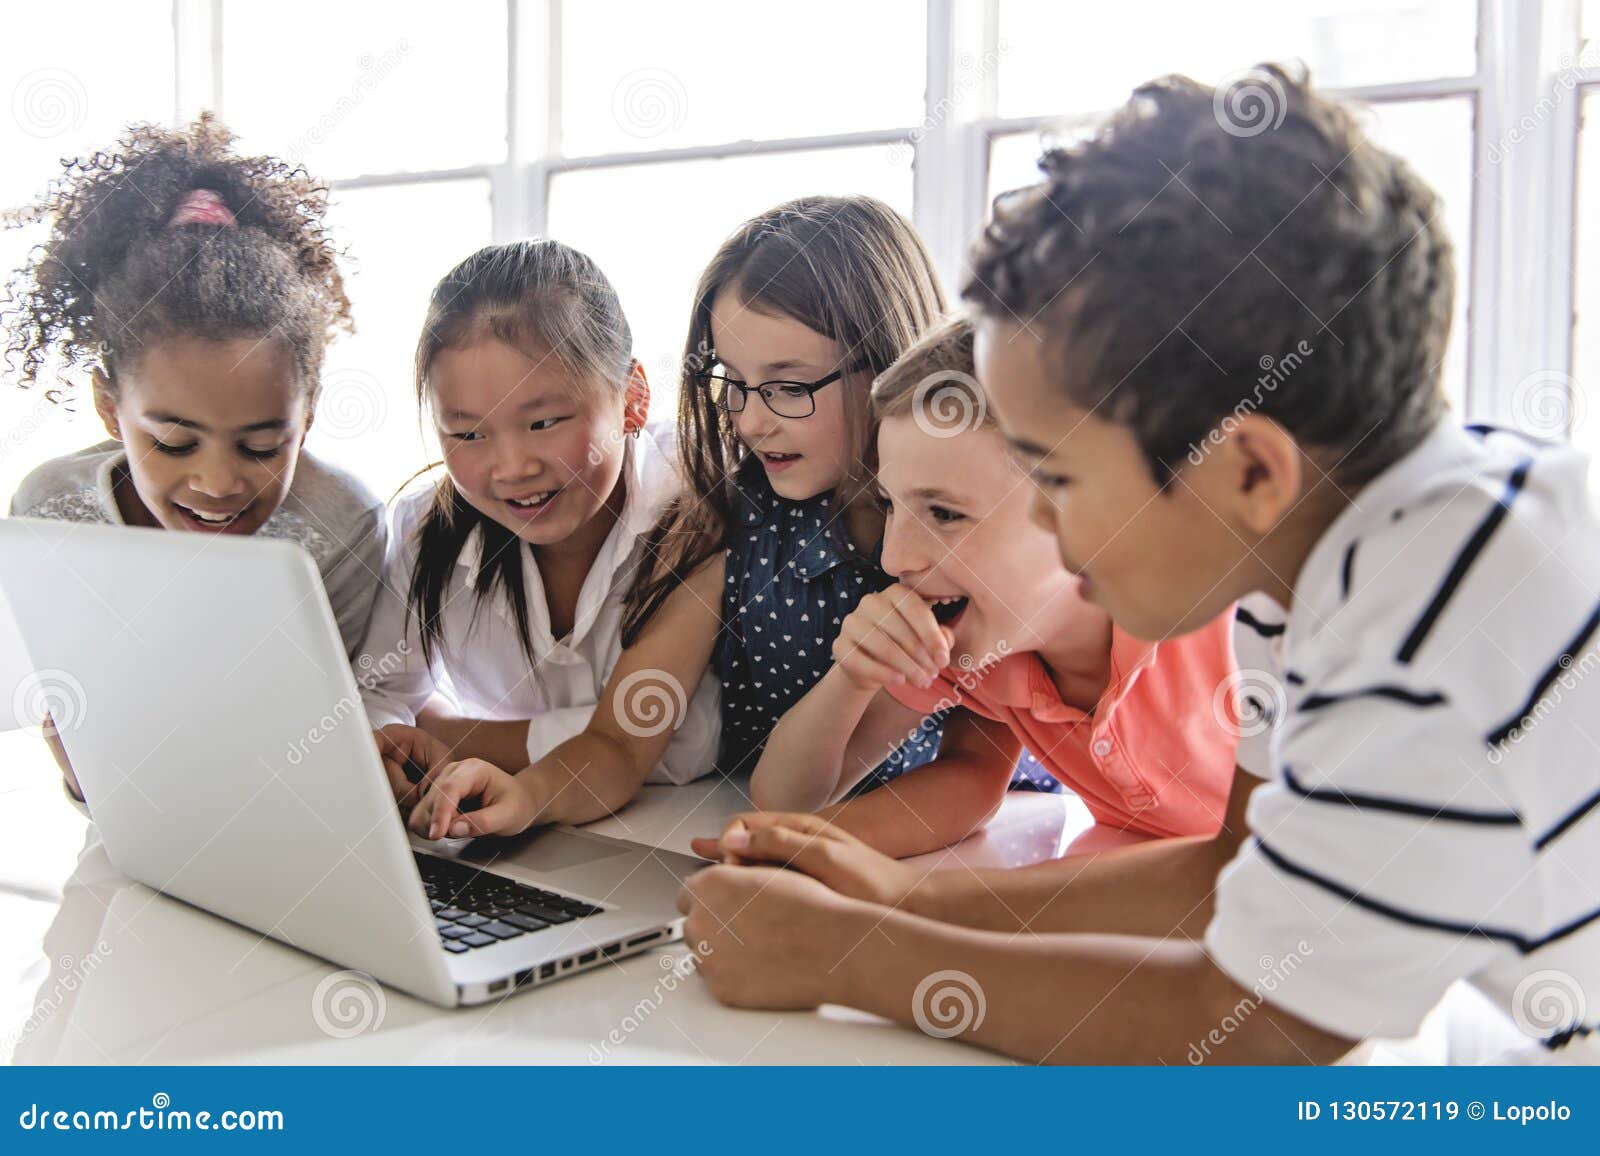 group of curious children watching stuff on the laptop screen